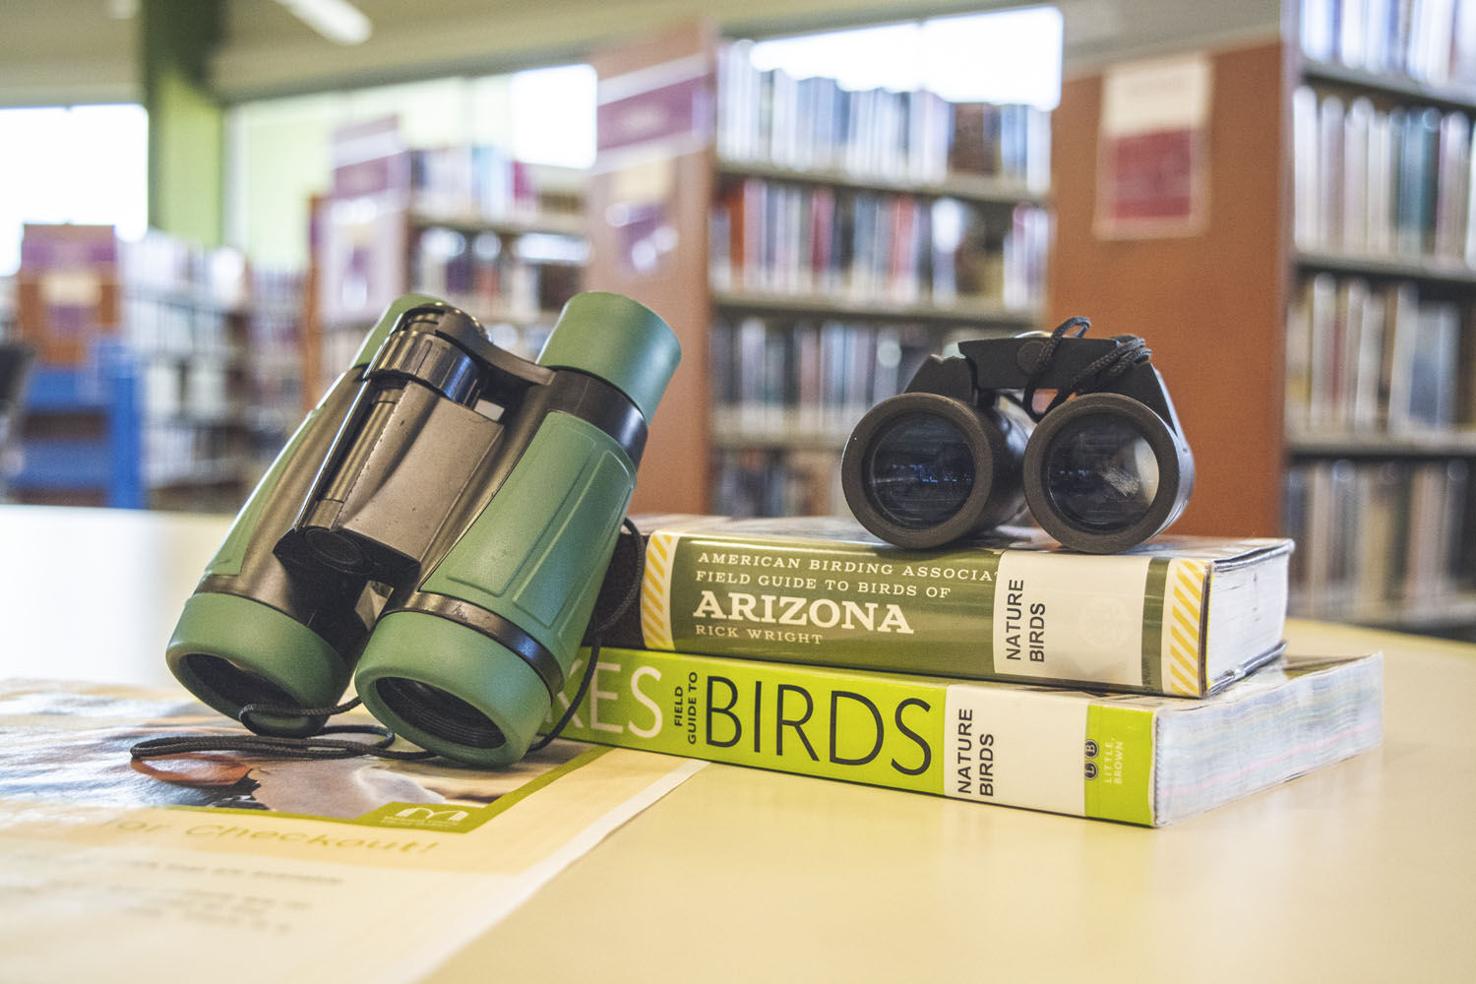 Have an imaginationfilled summer with Maricopa County Library Reading